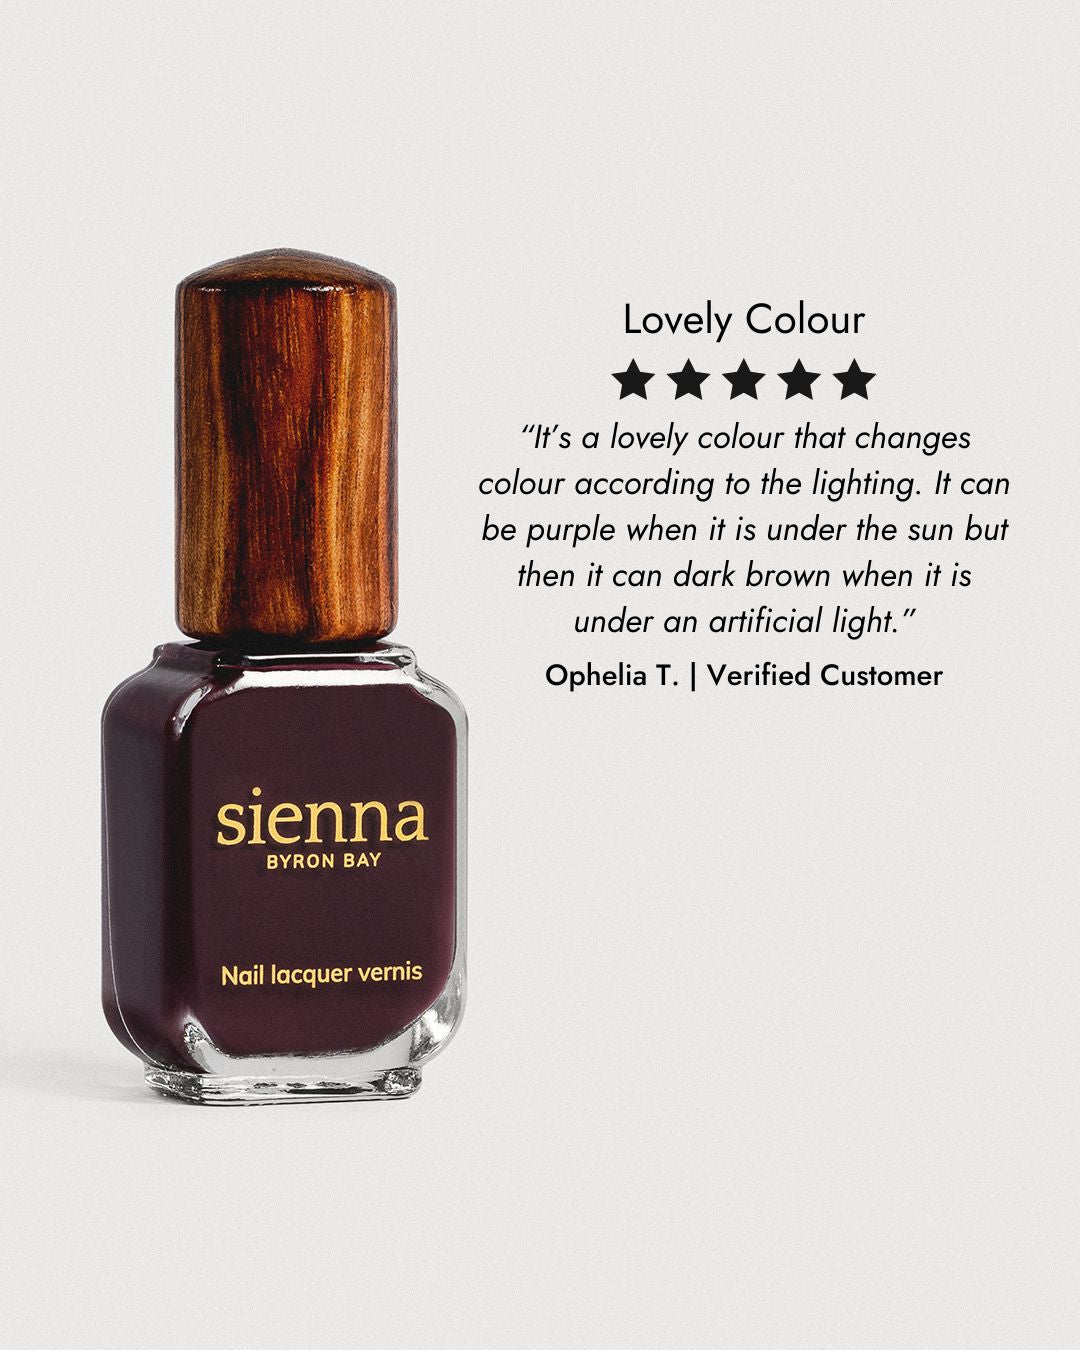 Aubergine nail polish glass bottle with timber cap 5 star review